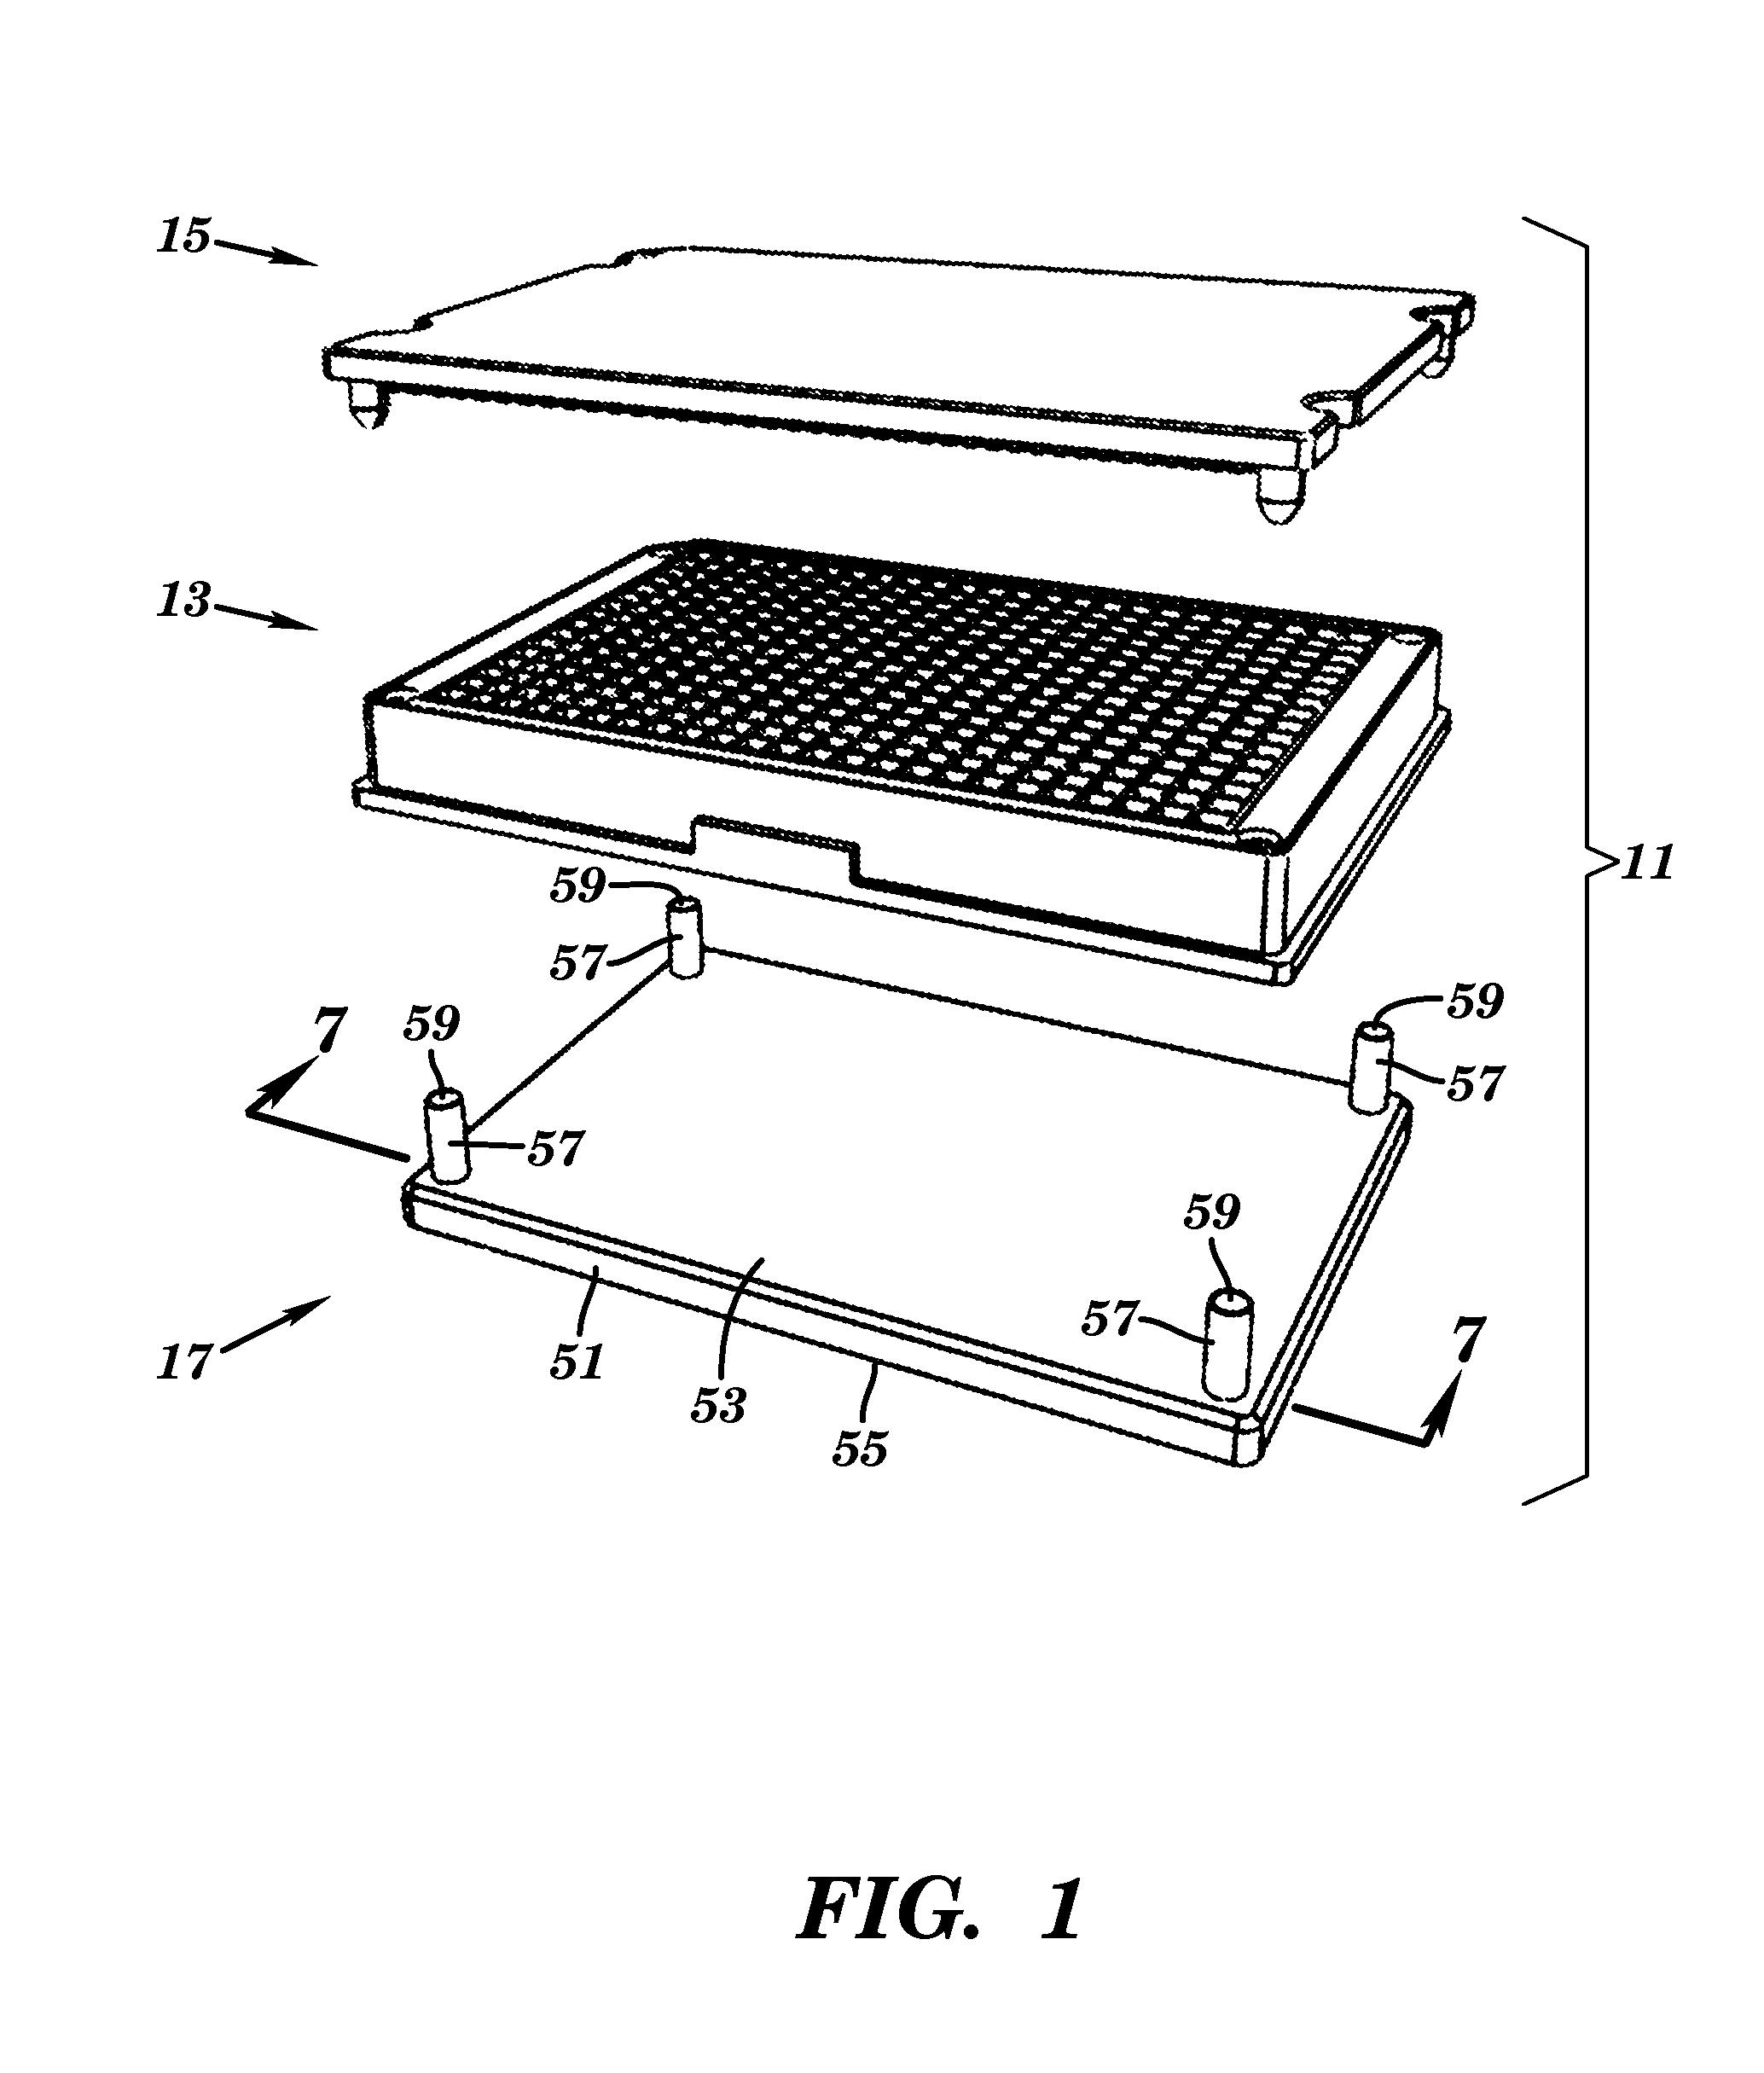 Apparatus for lidding or delidding microplate